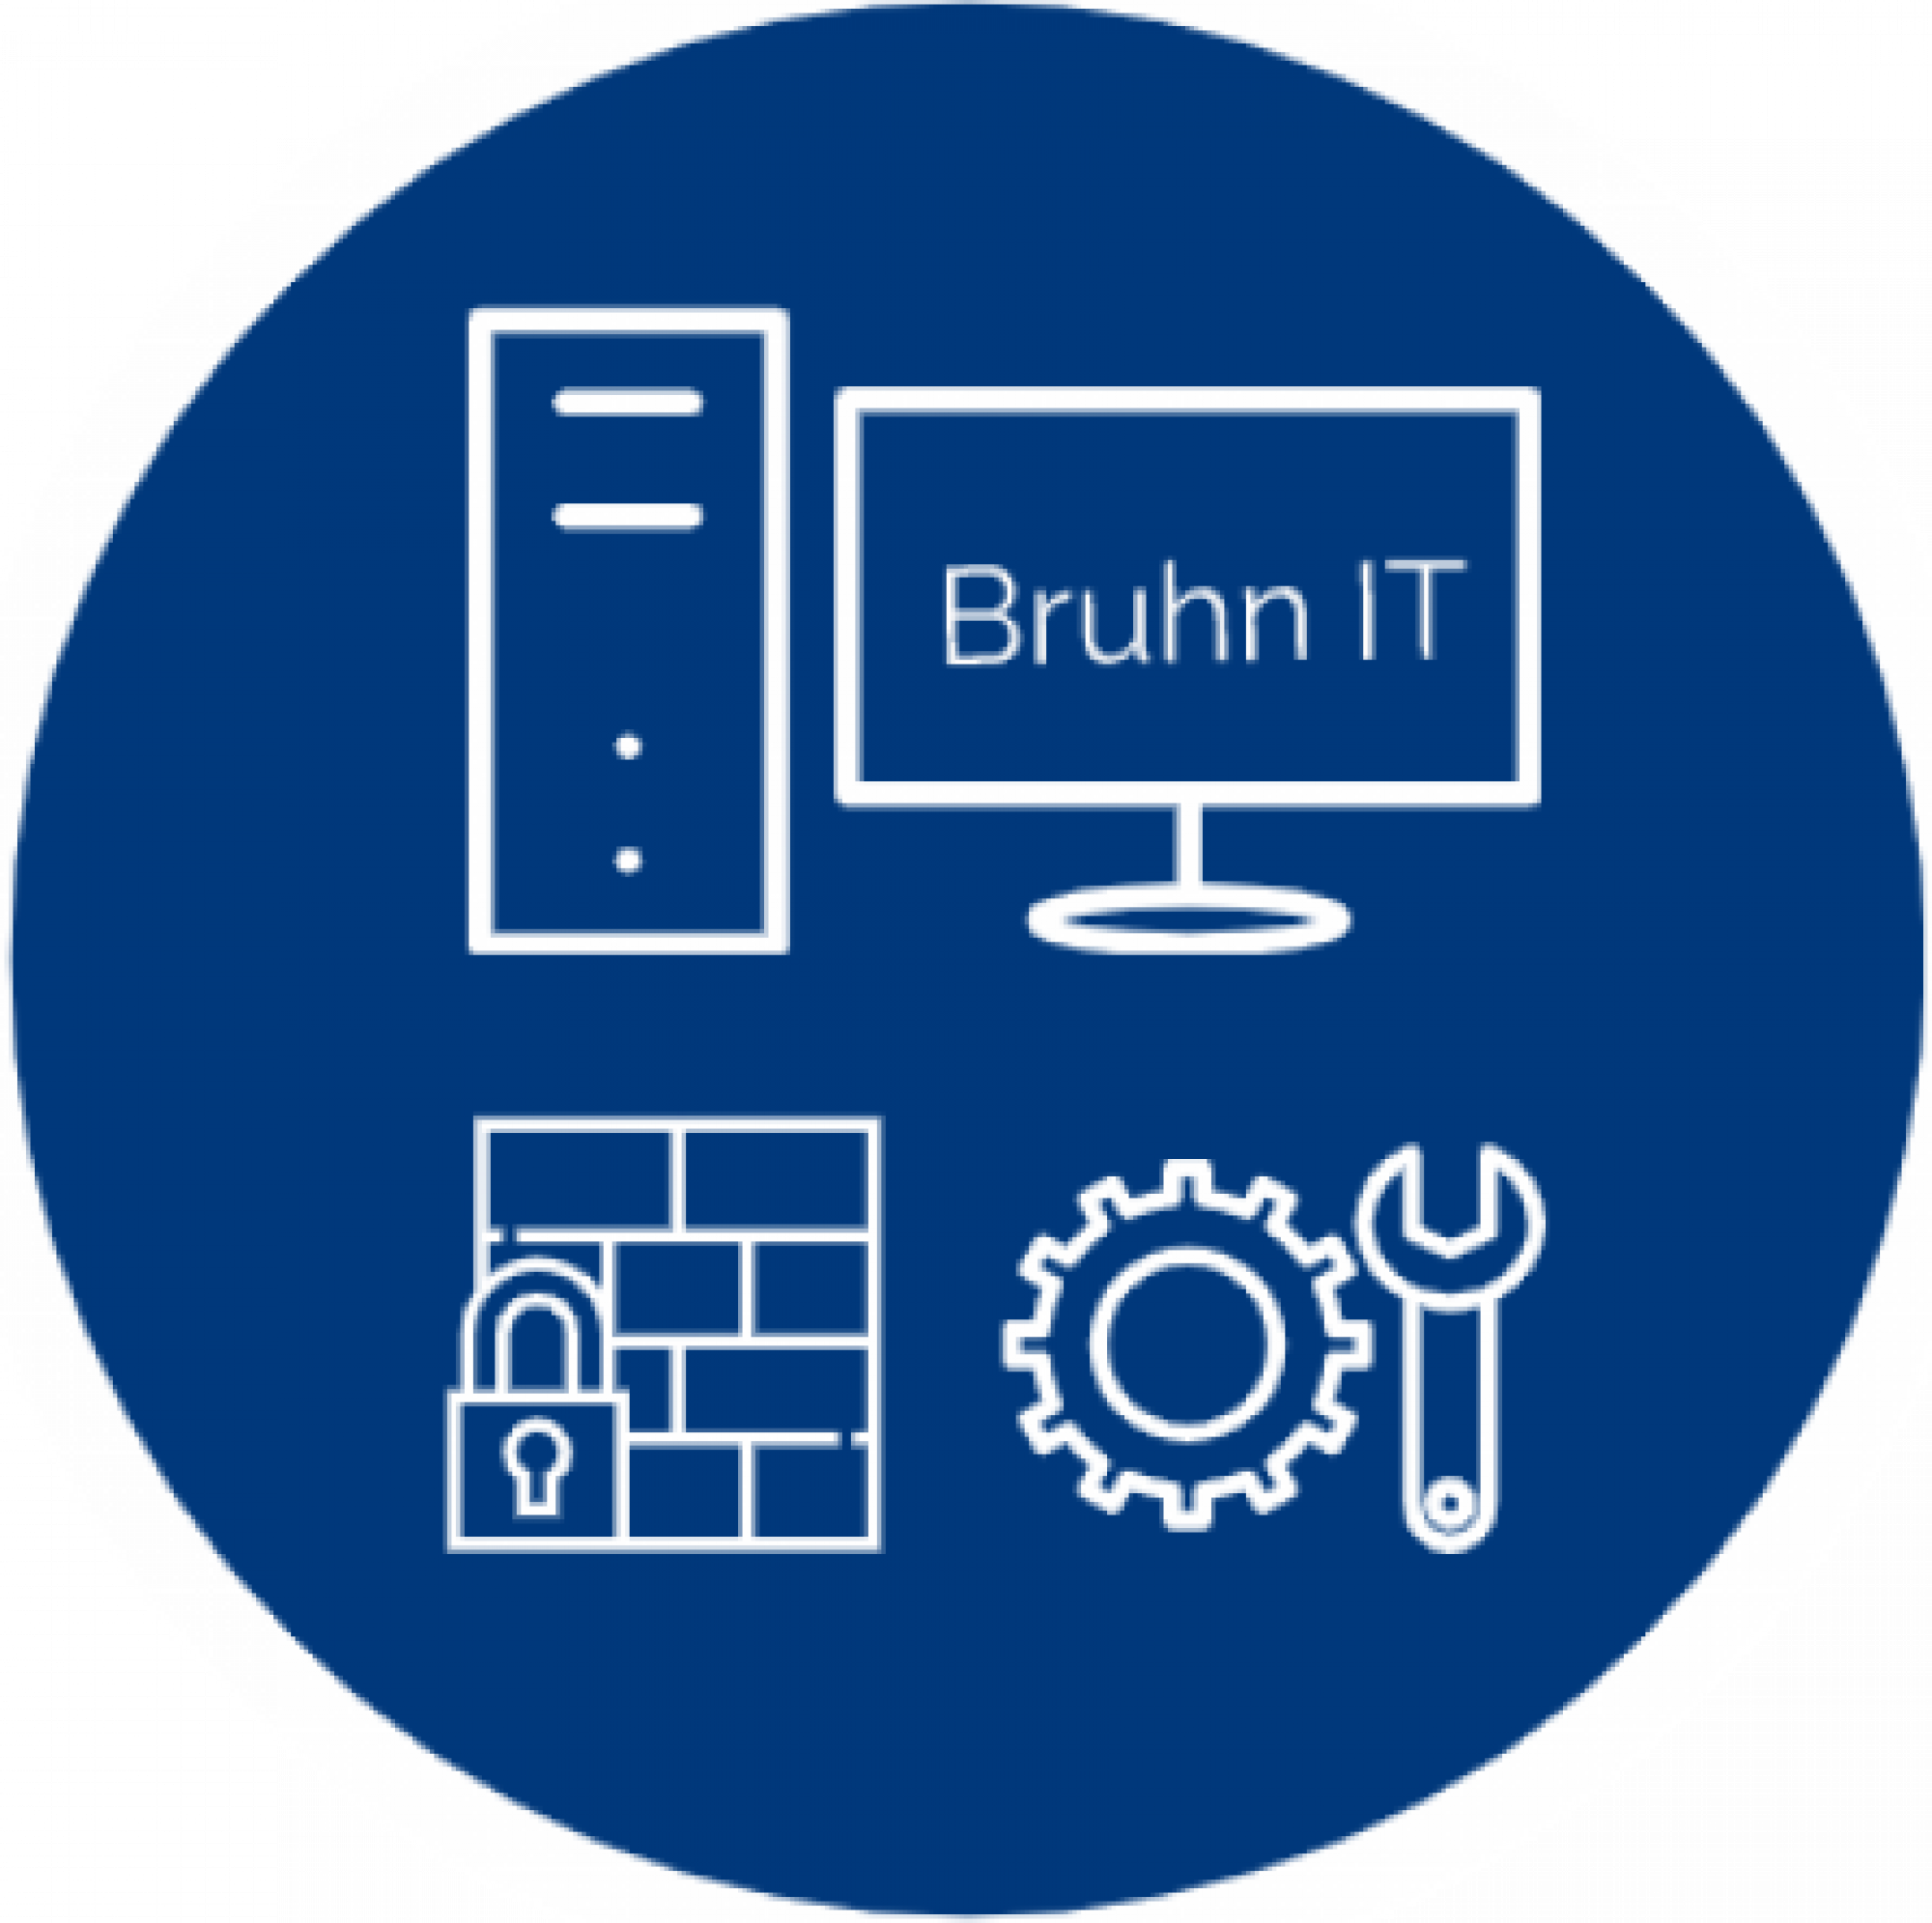 Bruhn IT Security & Service GmbH